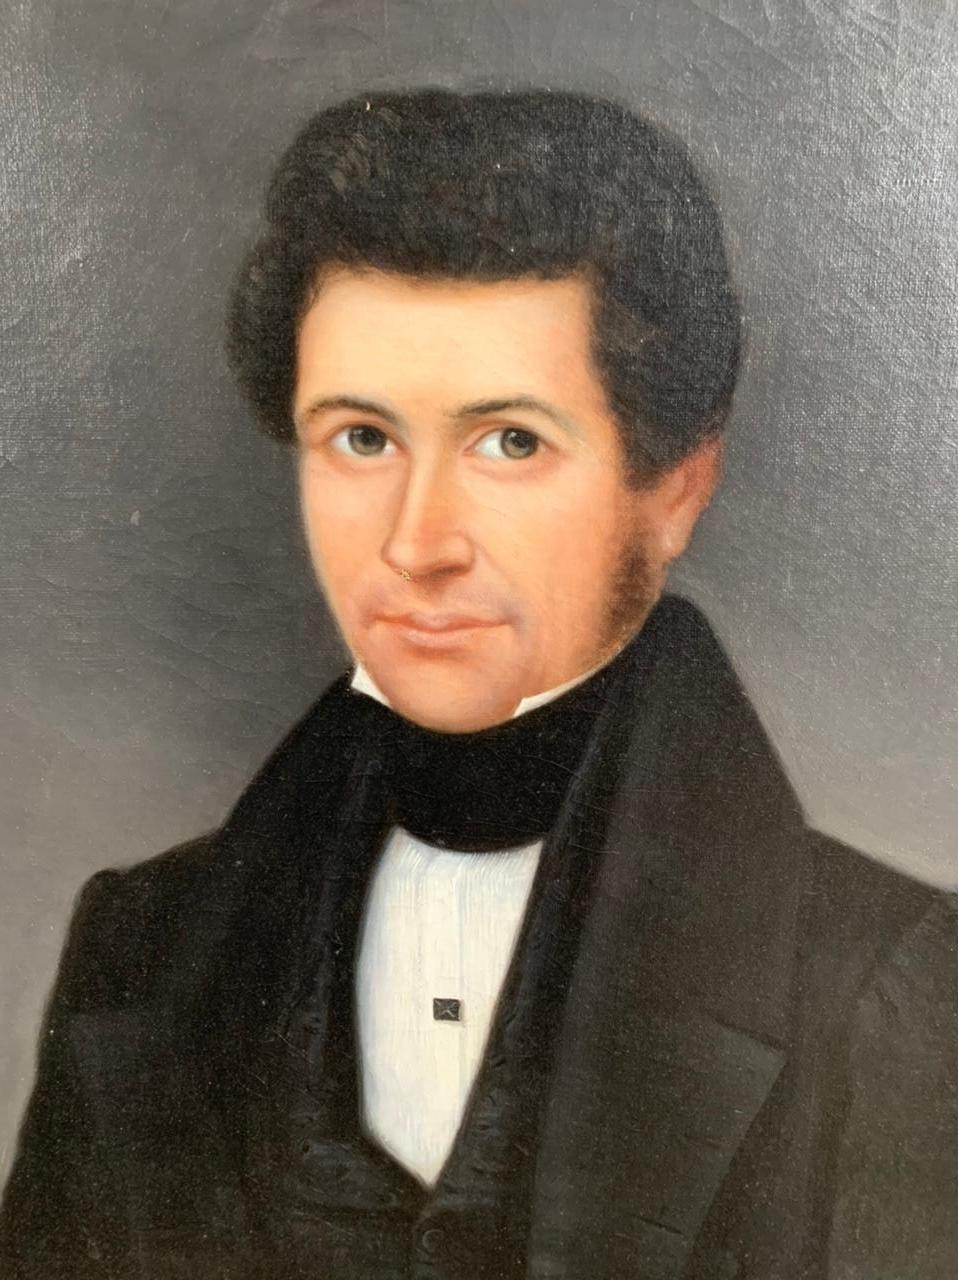 Very nice oil painting of a young man of quality. This finely detailed bust portrait depicts him in dandy costume. The man is looking at us from 3/4 showing the artist's mastery of perspective. 

The oil painting is smooth and of good quality.